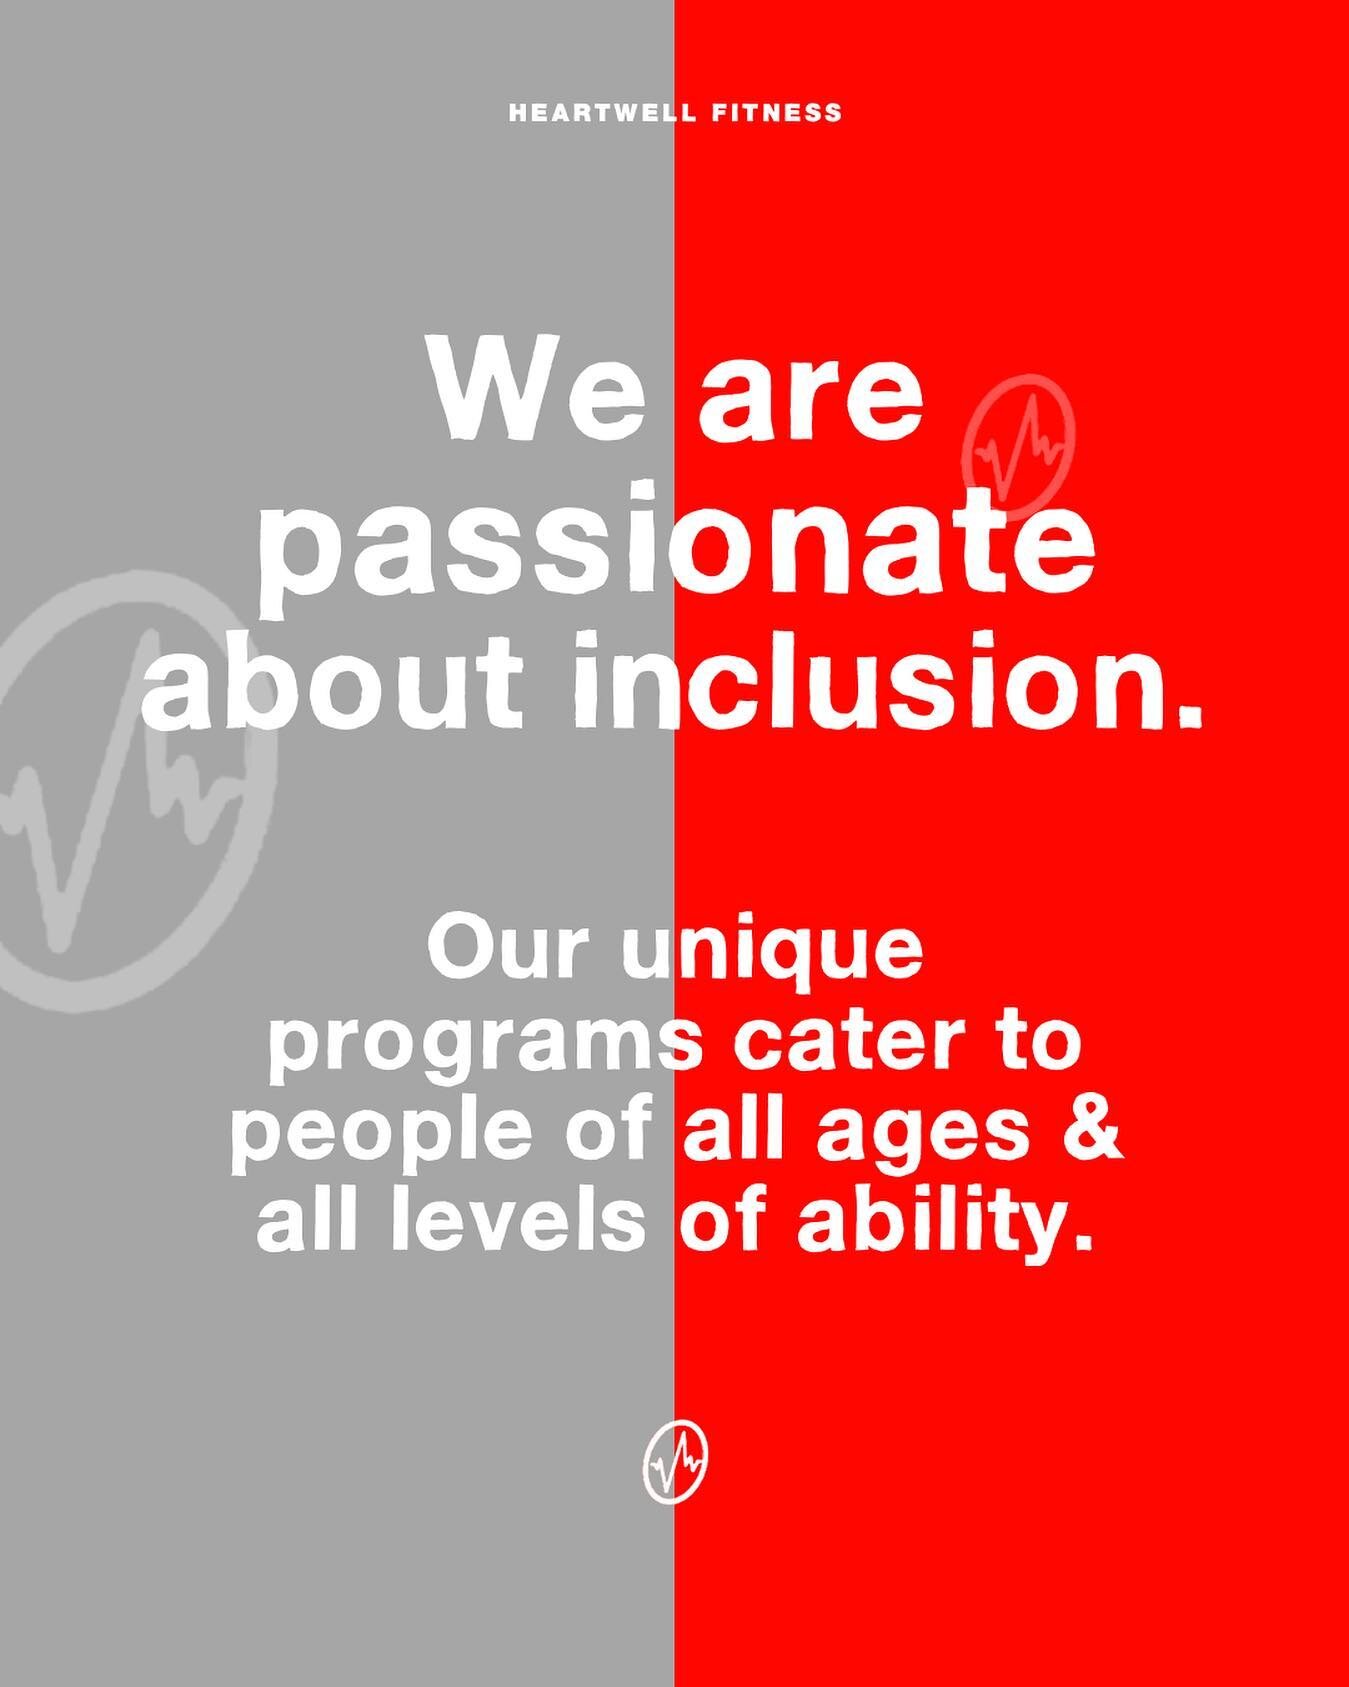 Our services are specialised, unique &amp; specific to each of our clients. To find out more about all of the programs we provide, visit our website at: www@heartwell.com.au.

#PhysicalEducationForAll

Image Description
White text over red and grey s